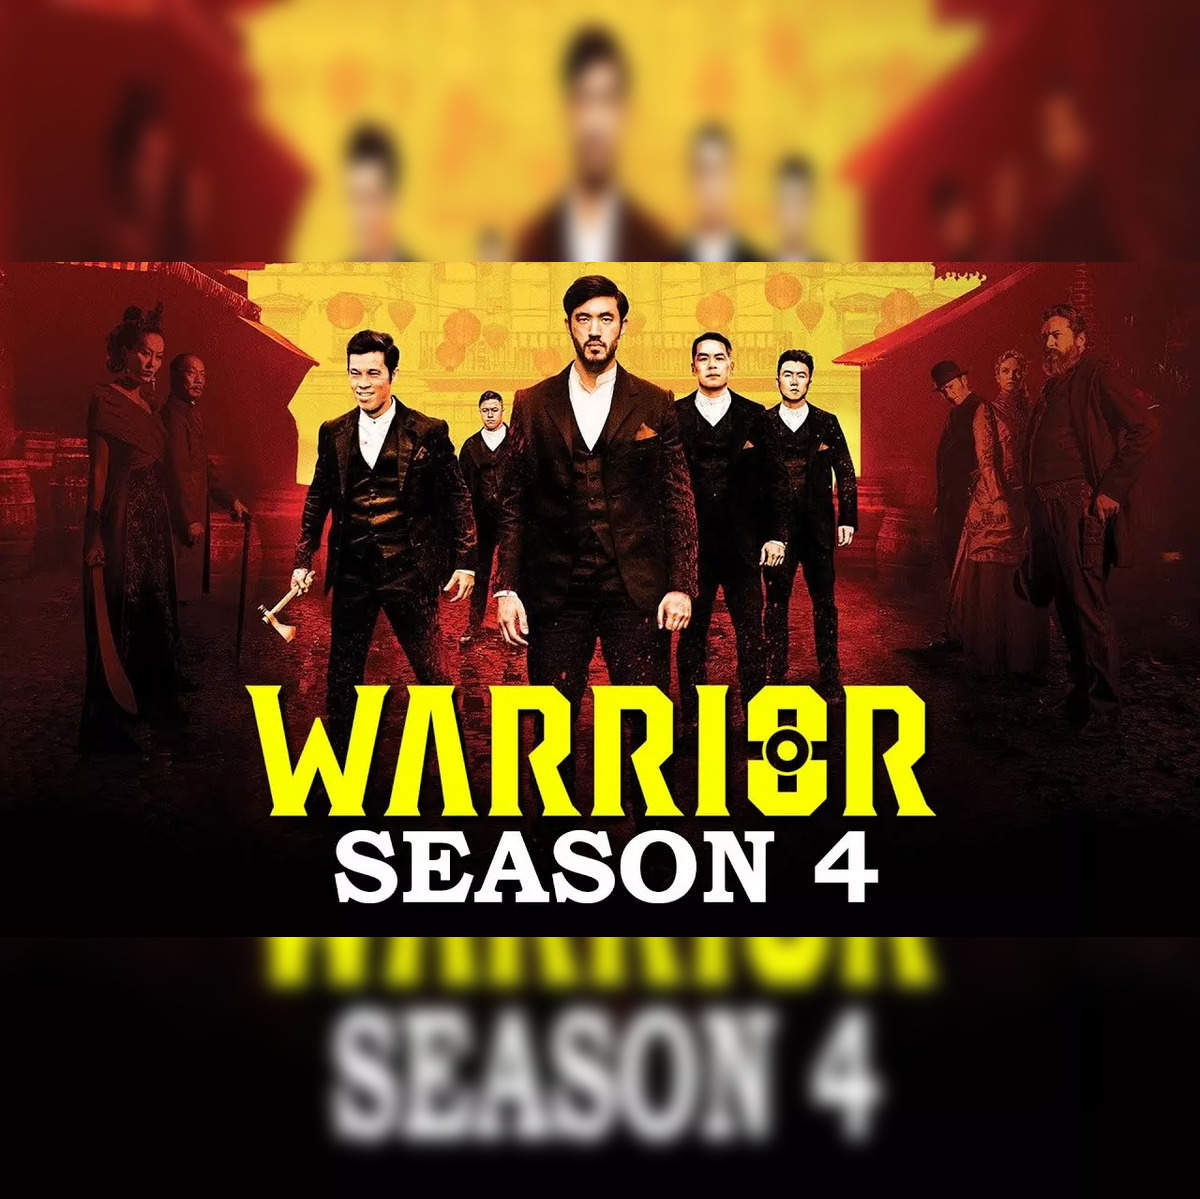 What is the status of Warrior season 4?